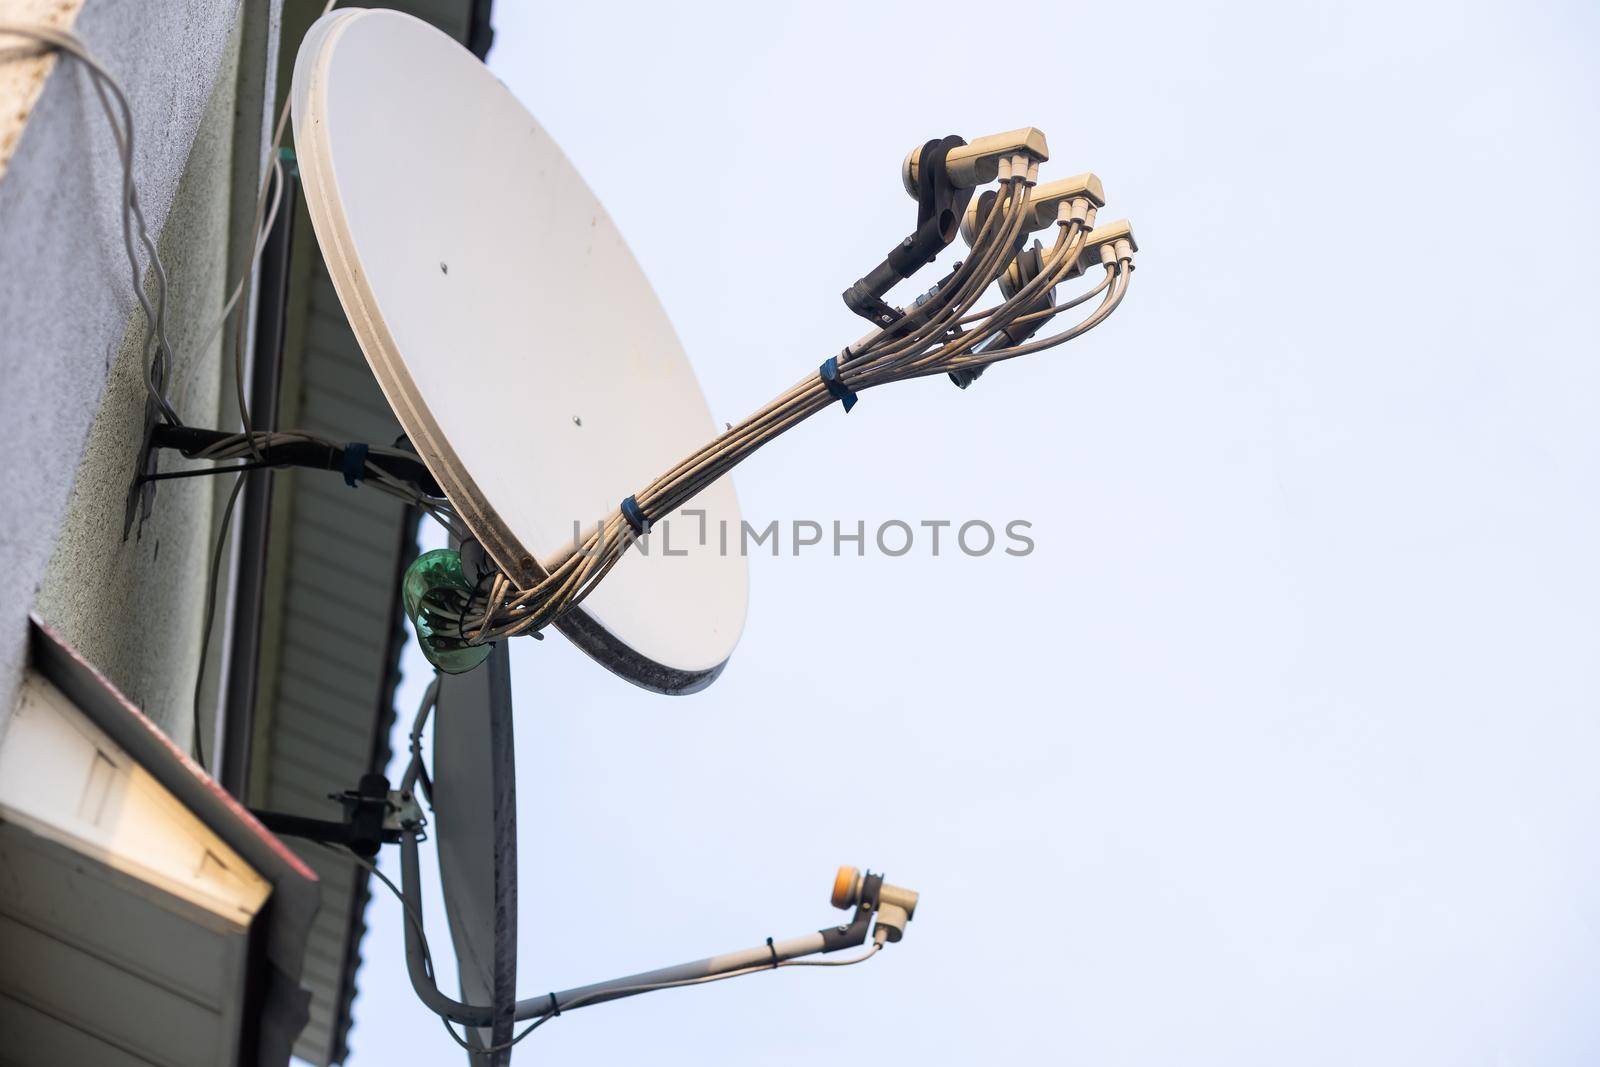 satellite dish and television antenna on roof top by Andelov13